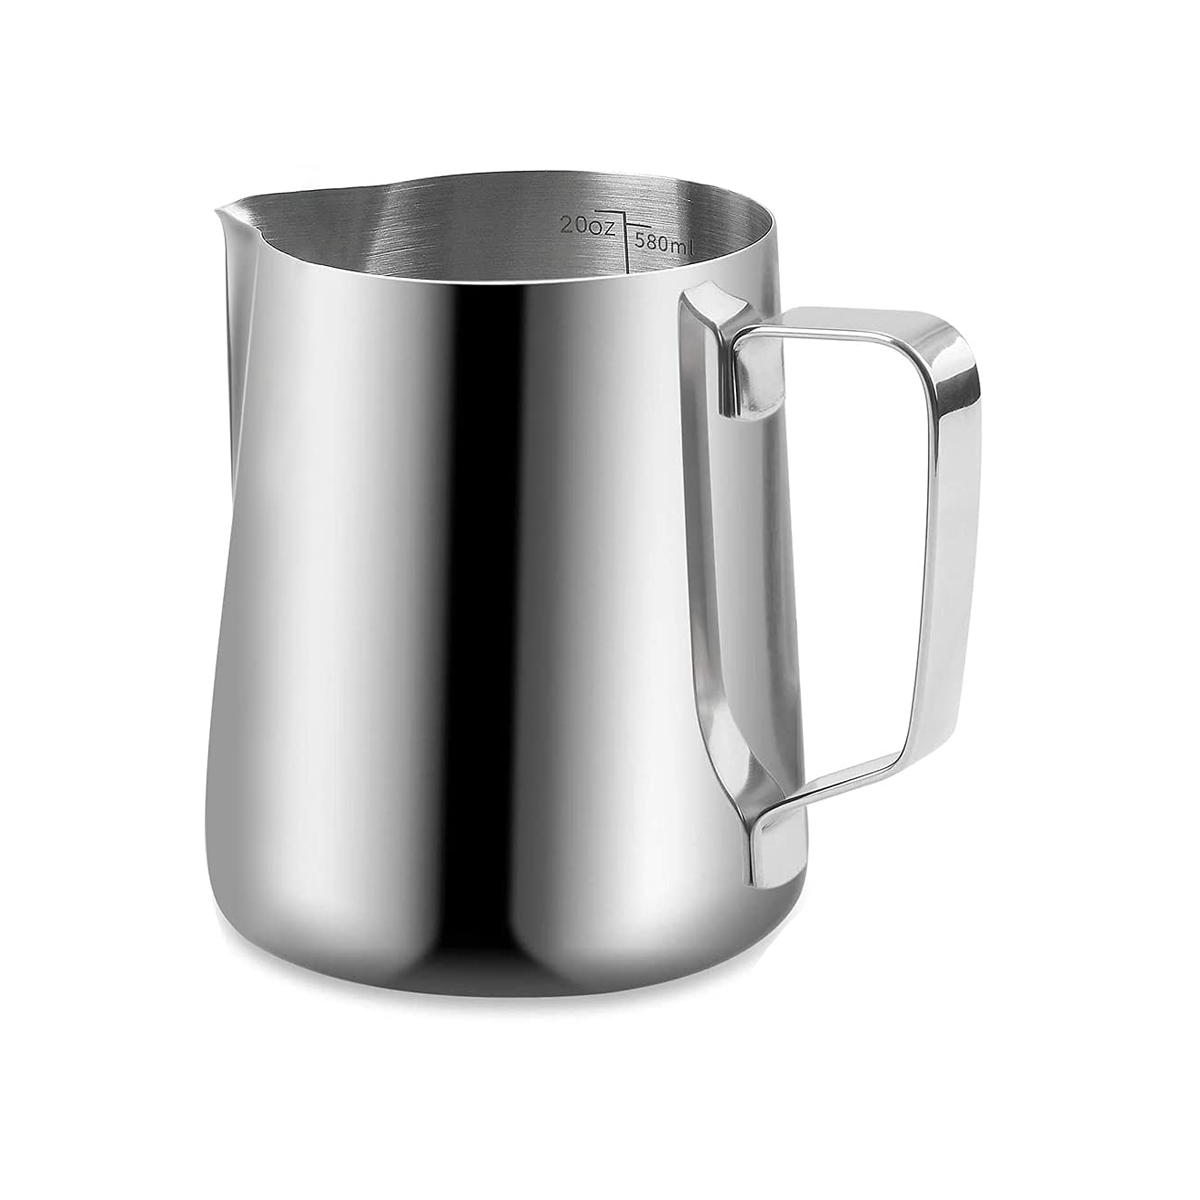 Milk Frothing Pitcher 600ml - Stainless Steel